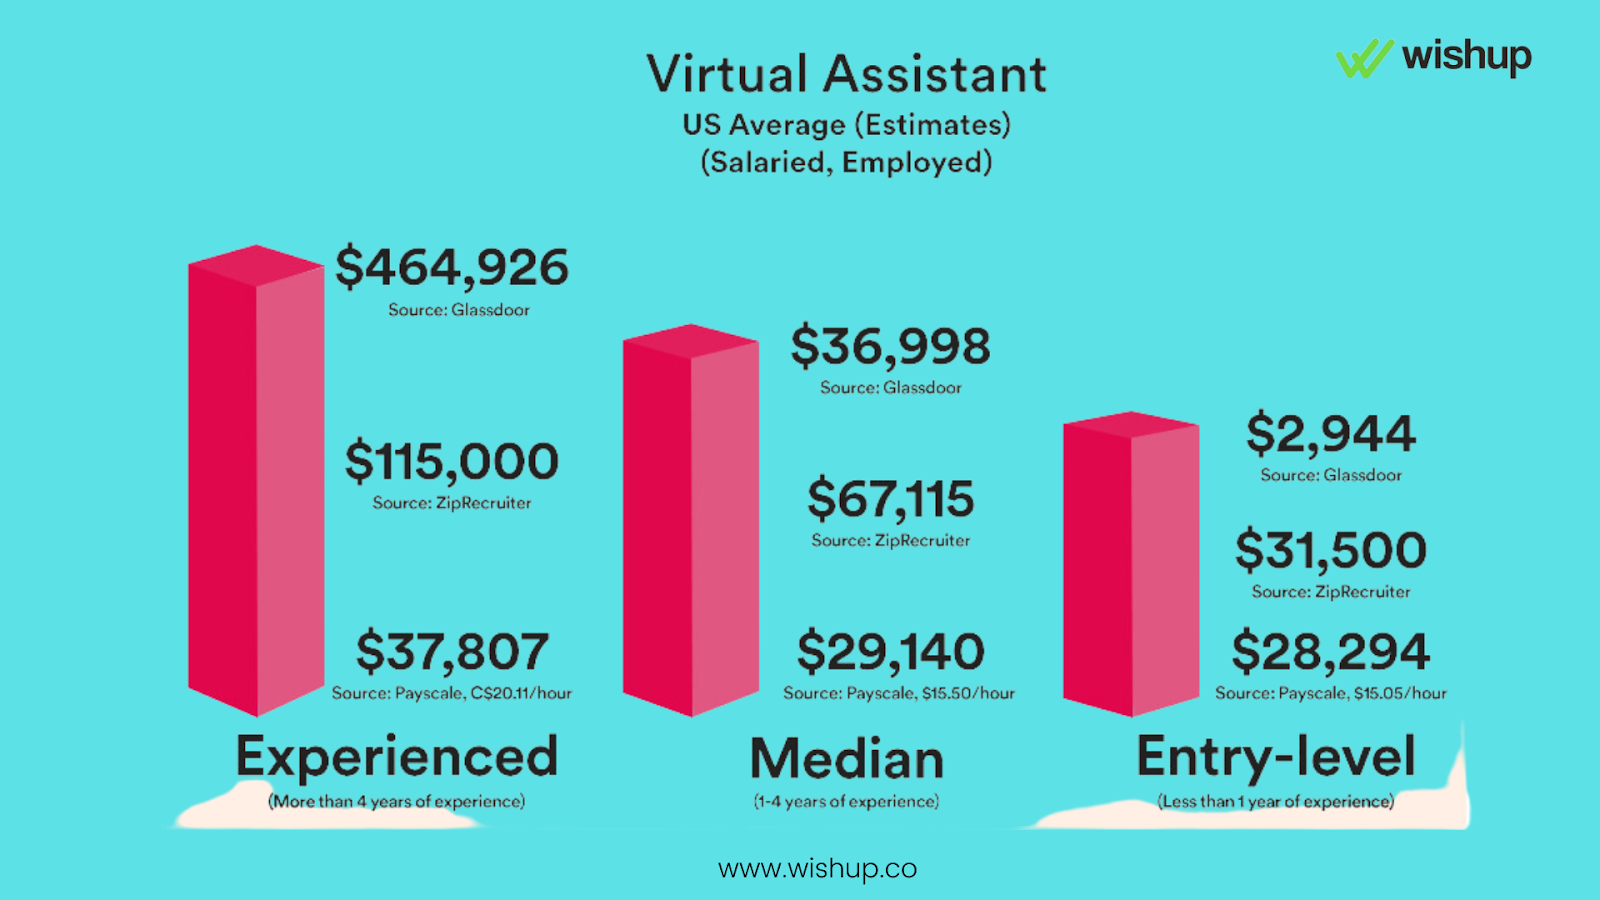  an infographic showing the salaries of experienced, median, and entry-level virtual assistants in the US
